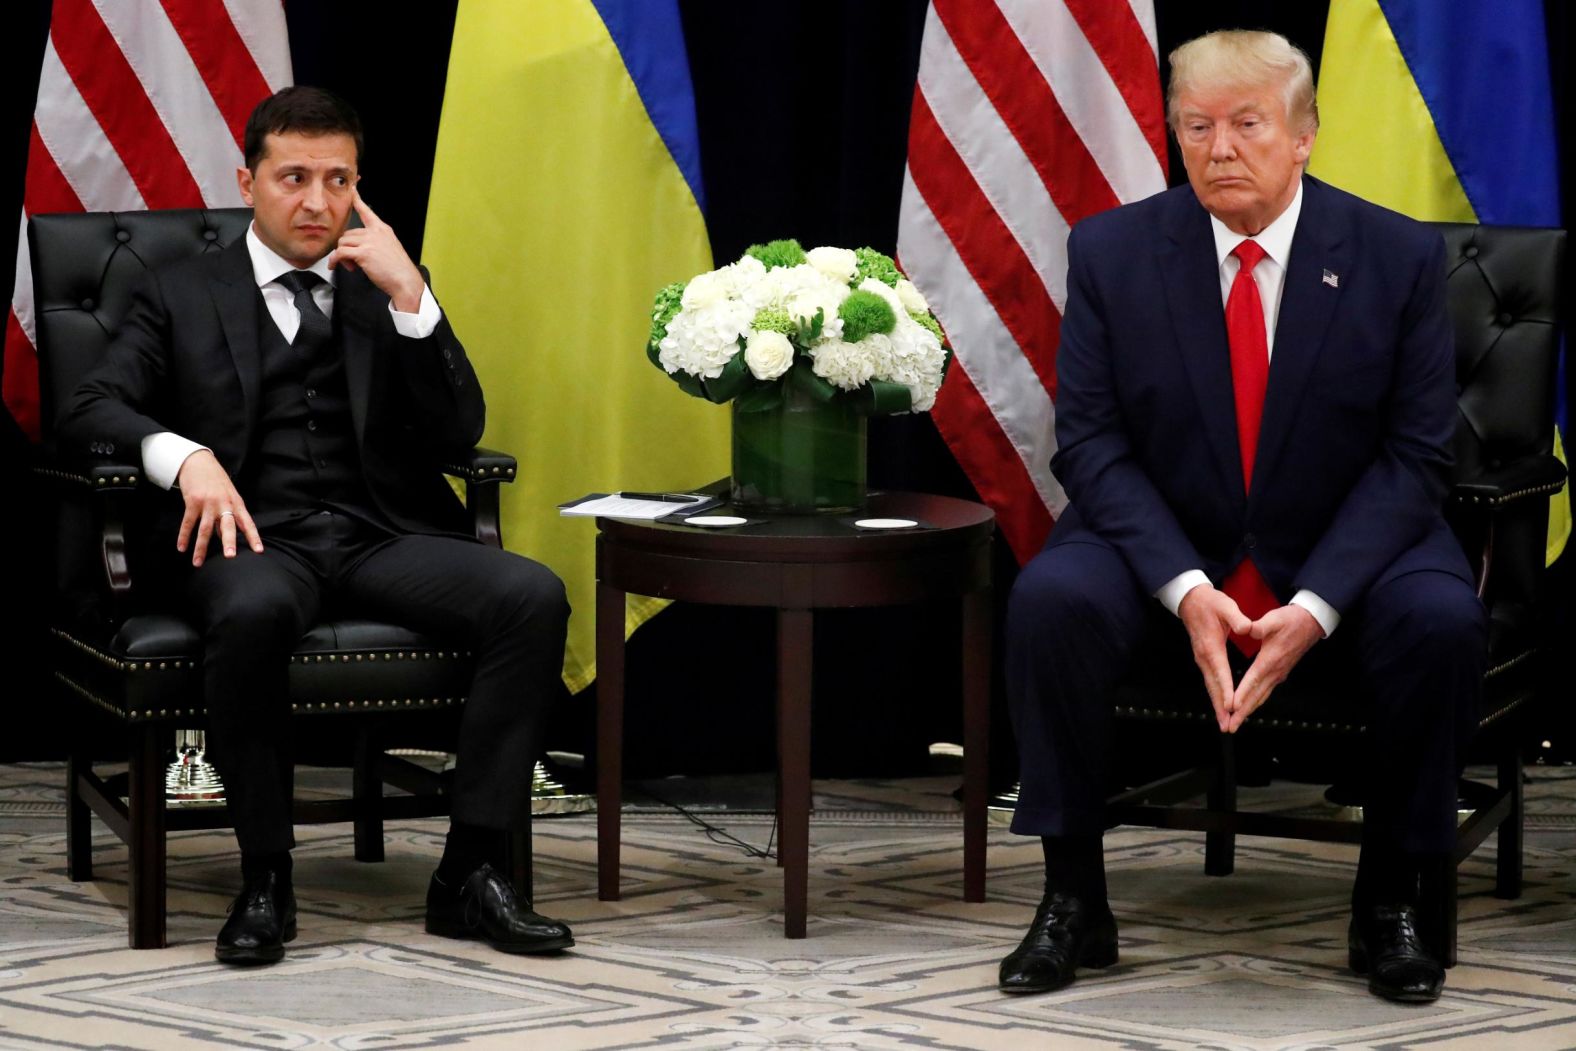 Zelensky and Trump meet on the sidelines of the UN General Assembly on September 25. The men <a href="index.php?page=&url=https%3A%2F%2Fwww.cnn.com%2F2019%2F09%2F25%2Fpolitics%2Fvolodymyr-zelensky-donald-trump-meeting-unga%2Findex.html" target="_blank">eagerly sought to deflect questions of wrongdoing </a>after the call transcript was released earlier in the day. "There was no pressure," Trump insisted, denying allegations he was using his position of power to prod Ukraine into investigating a political rival. Zelensky said, "Nobody pushed me."